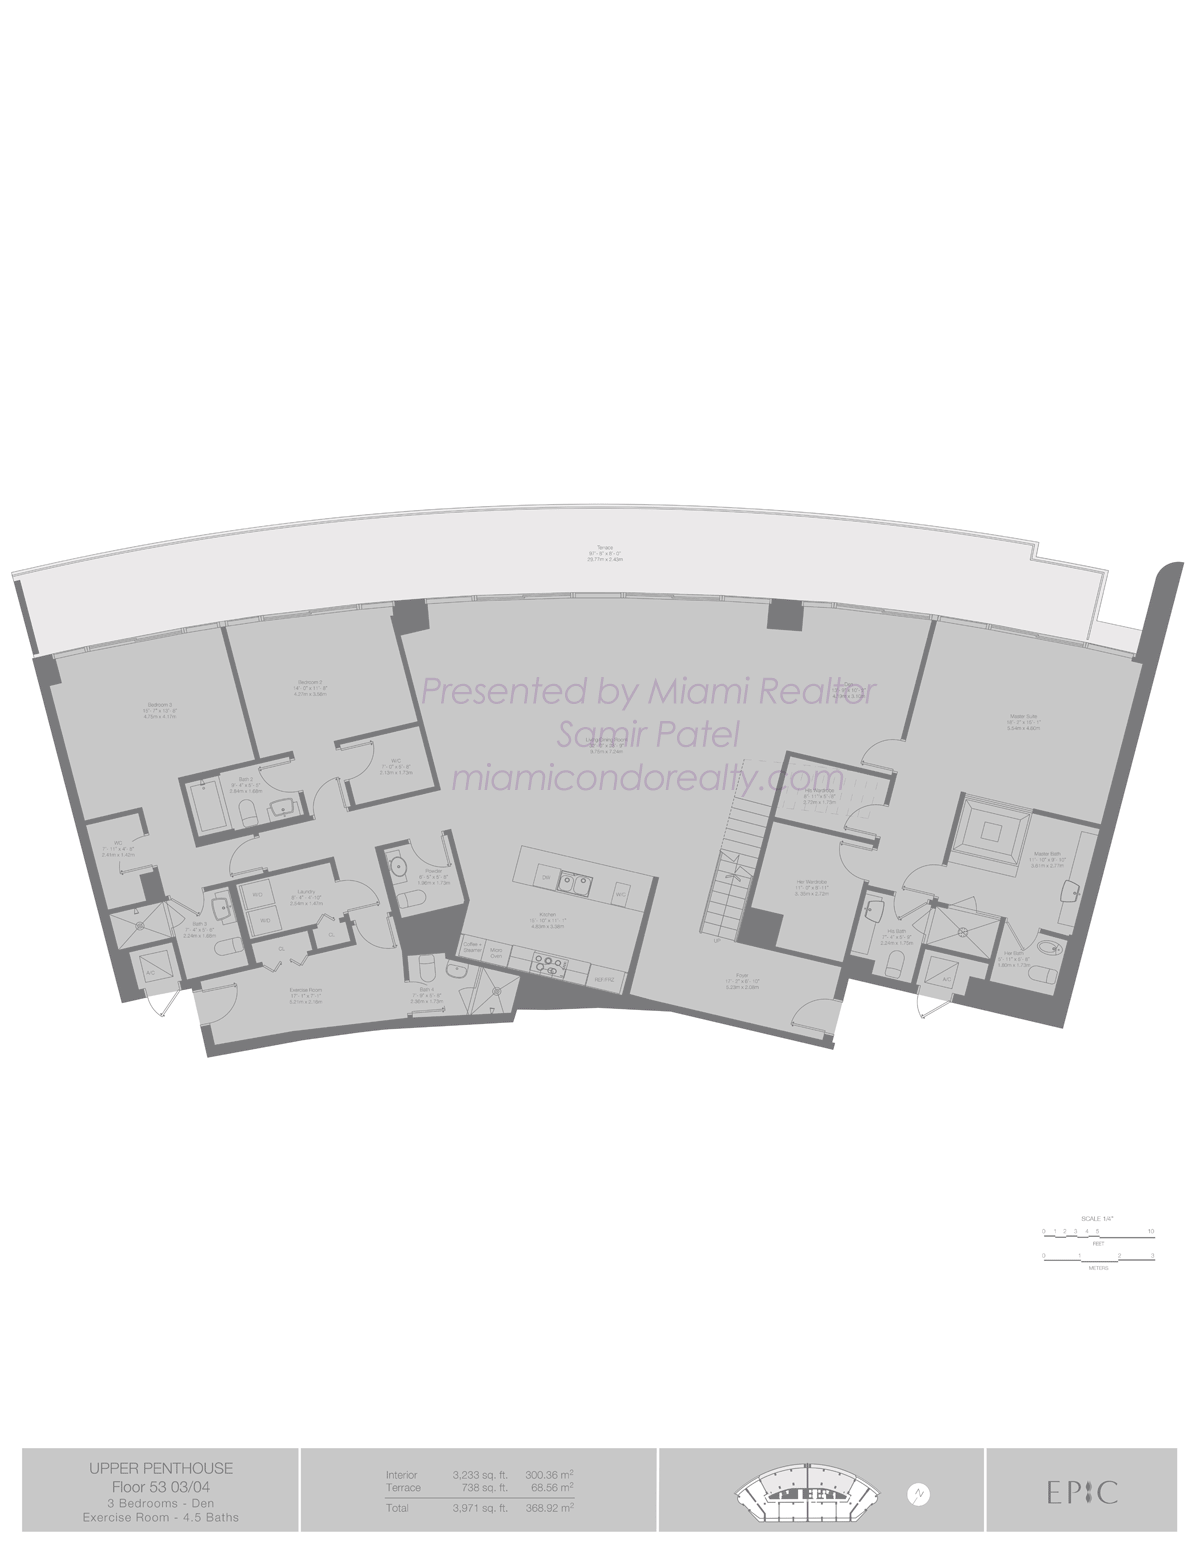 EPIC Residences Upper Penthouse Floorplans for Units 5303 and 5304